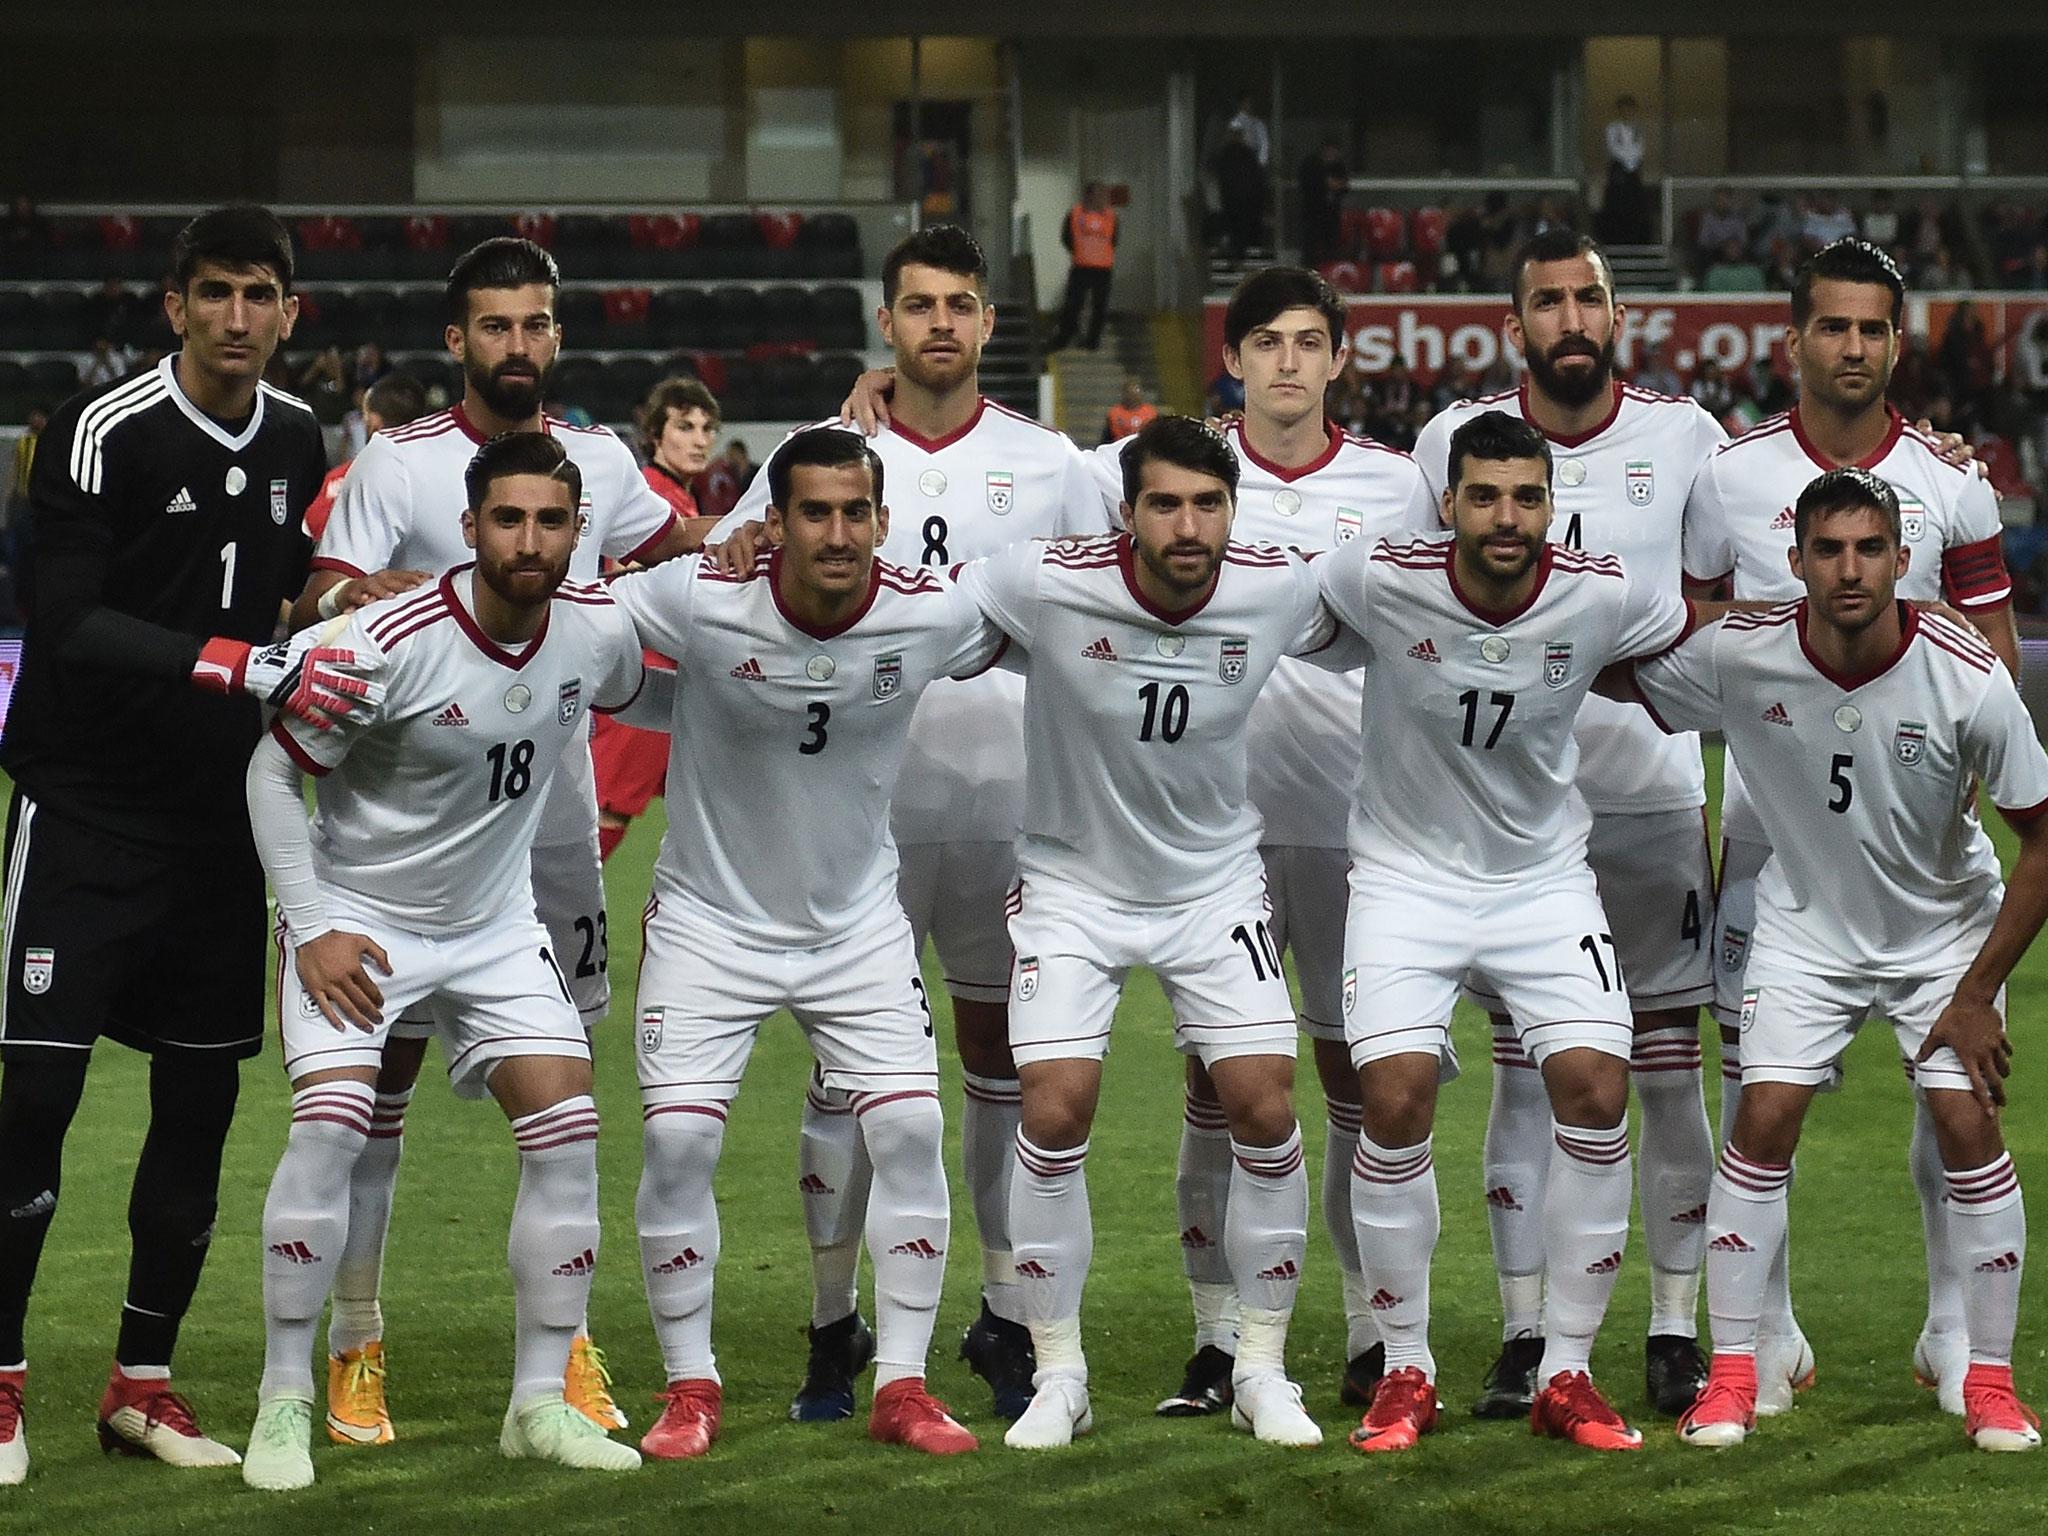 Iranians can’t even drown their sorrows if their team lose – imagine that